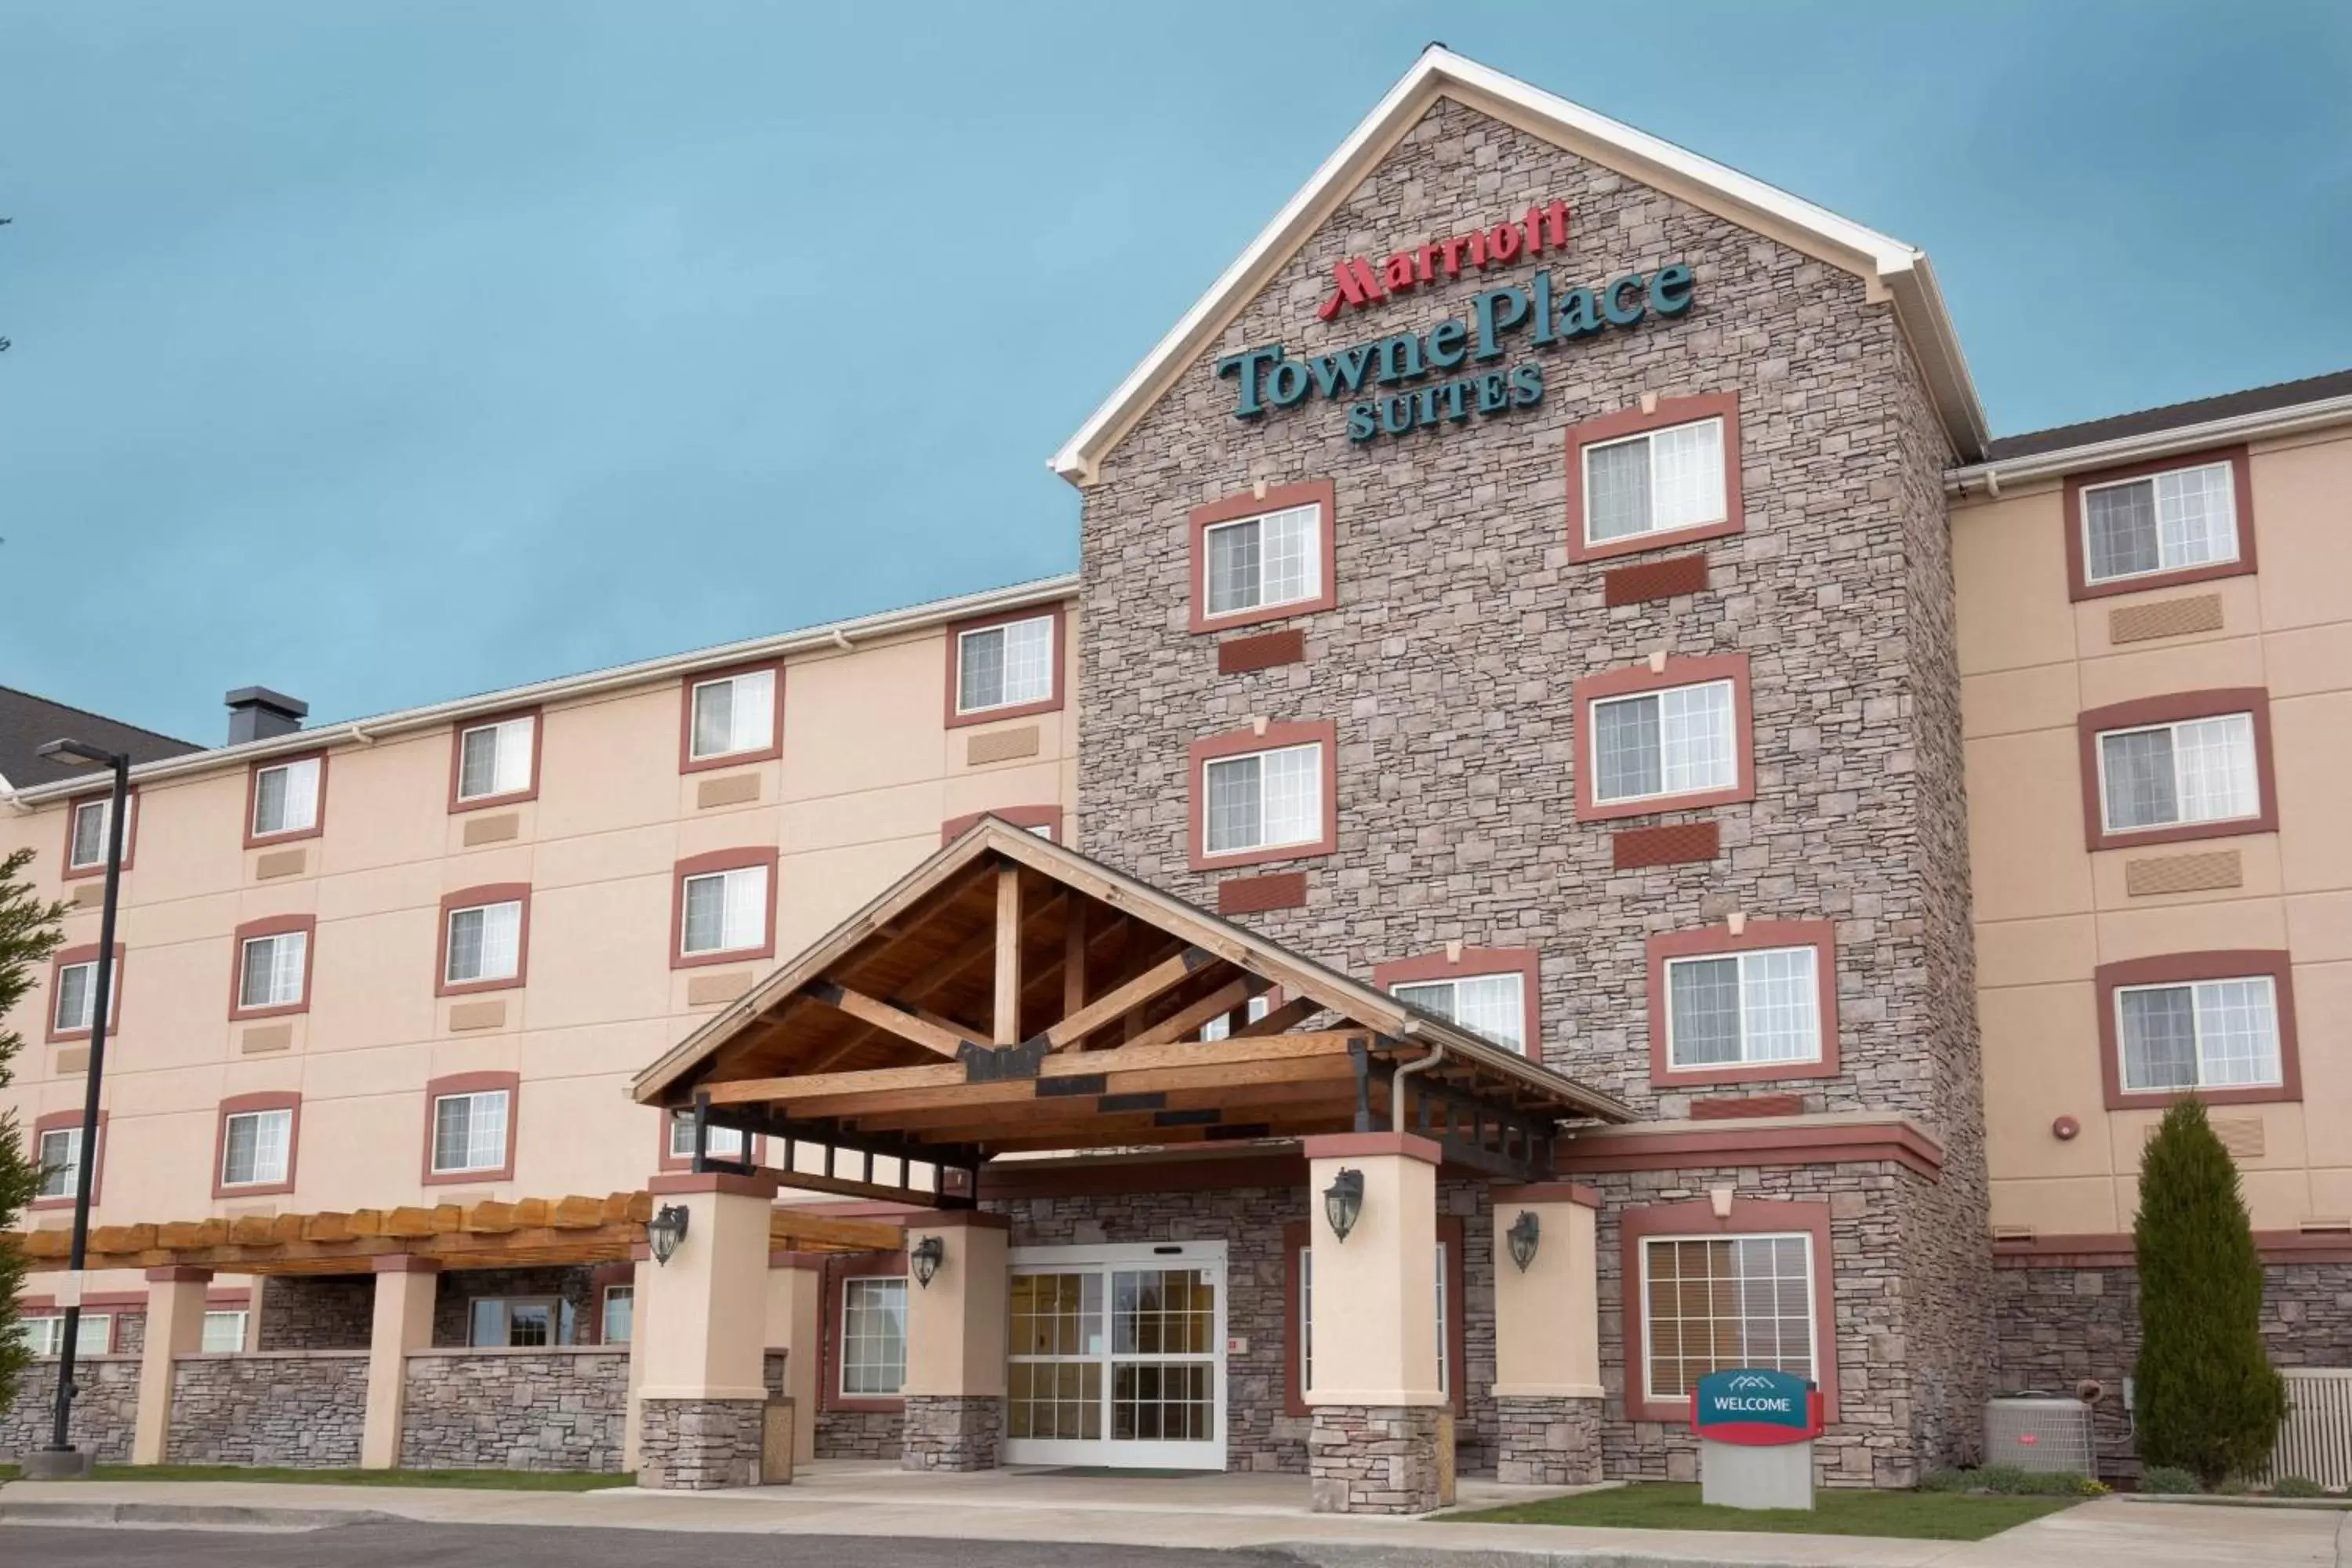 Property Building in TownePlace Suites Pocatello